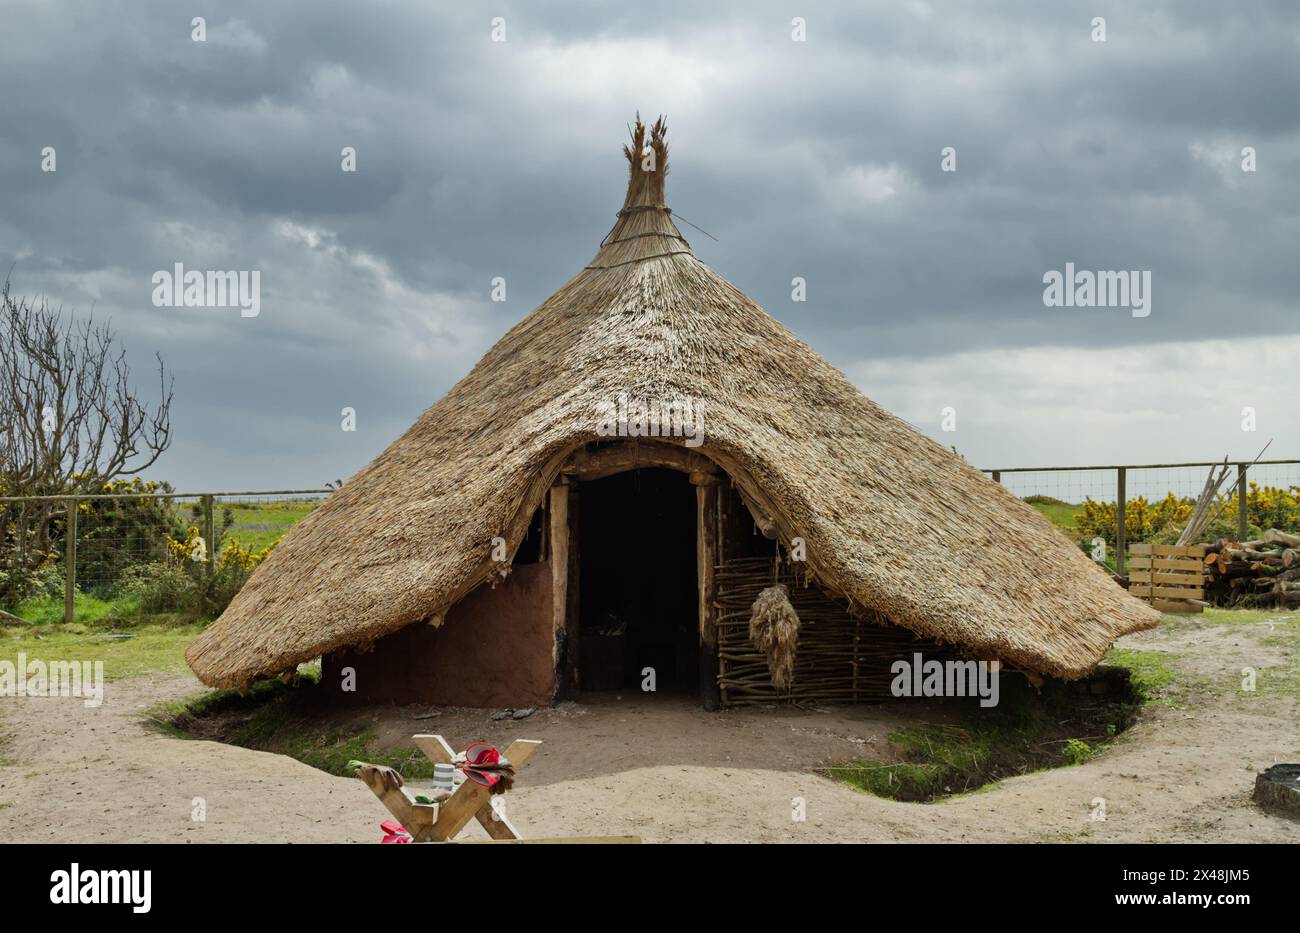 Reconstruction Of An Iron Age Roundhouse With Thatched Conical Roof And Partly Finished Wattle And Daub Walls, Hengistbury Head,UK Stock Photo